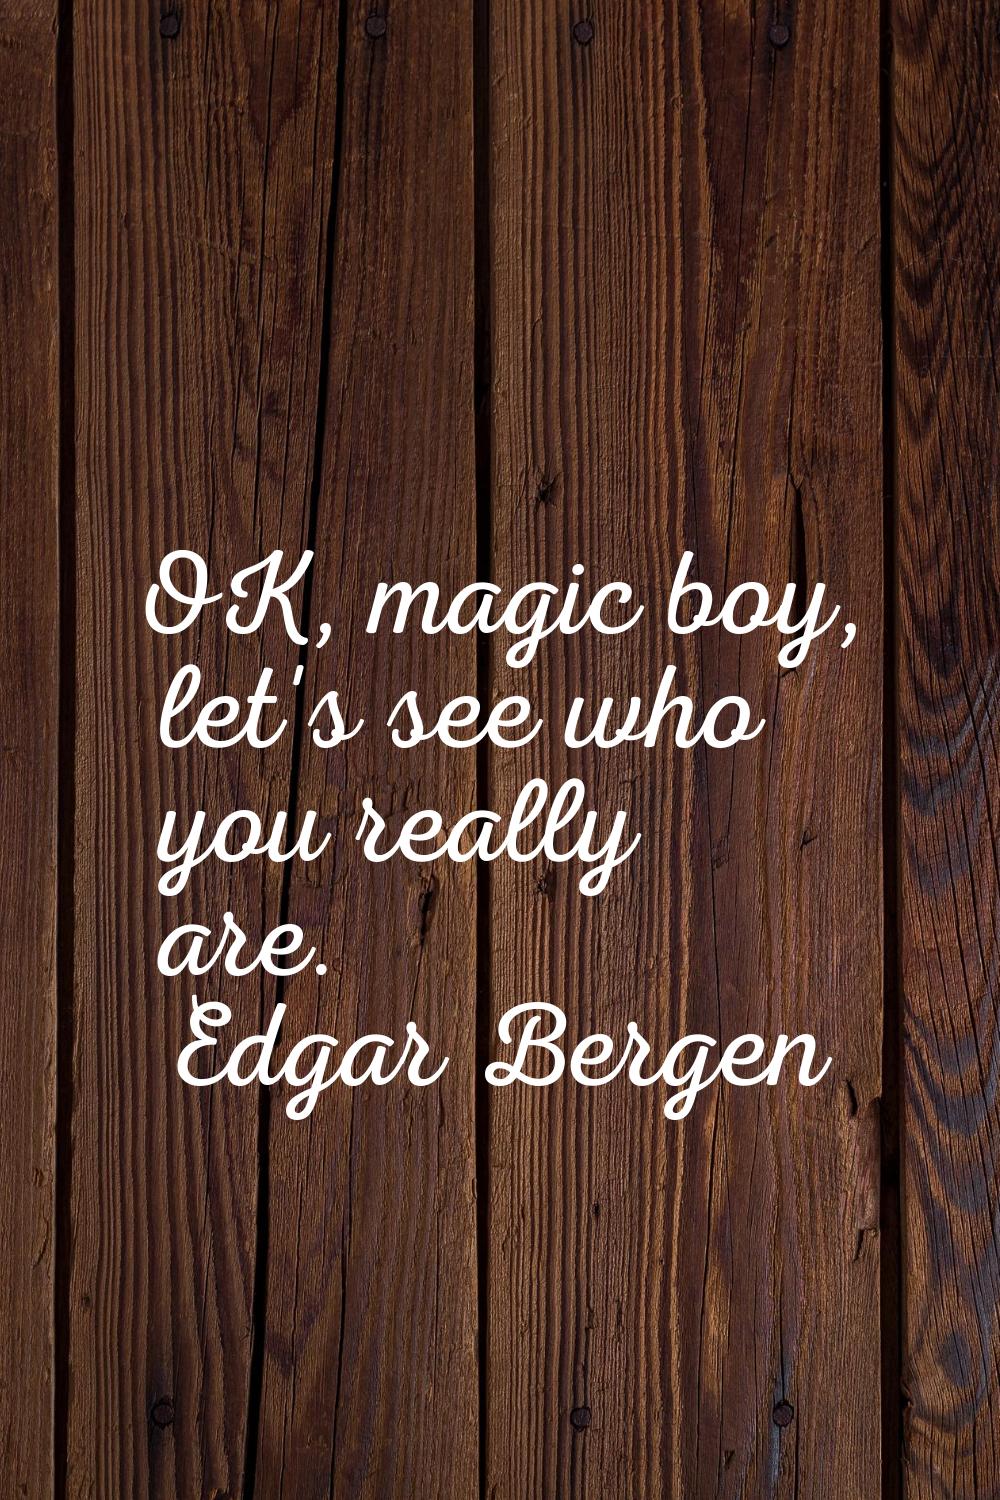 OK, magic boy, let's see who you really are.